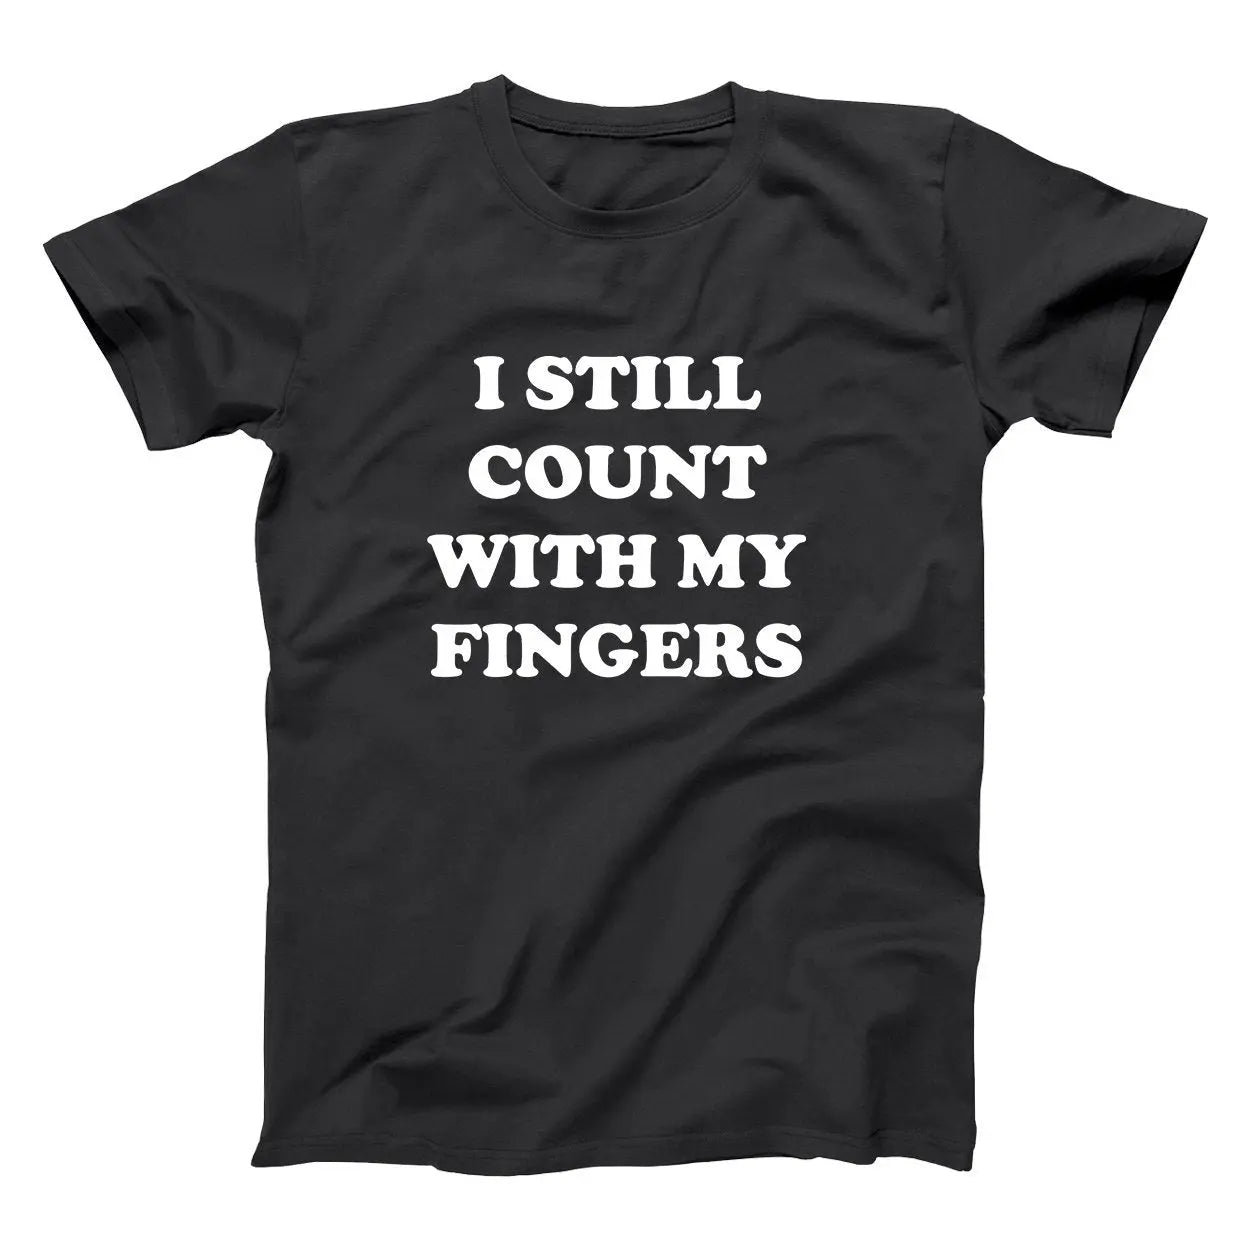 I Still Count With My Fingers Tshirt - Donkey Tees